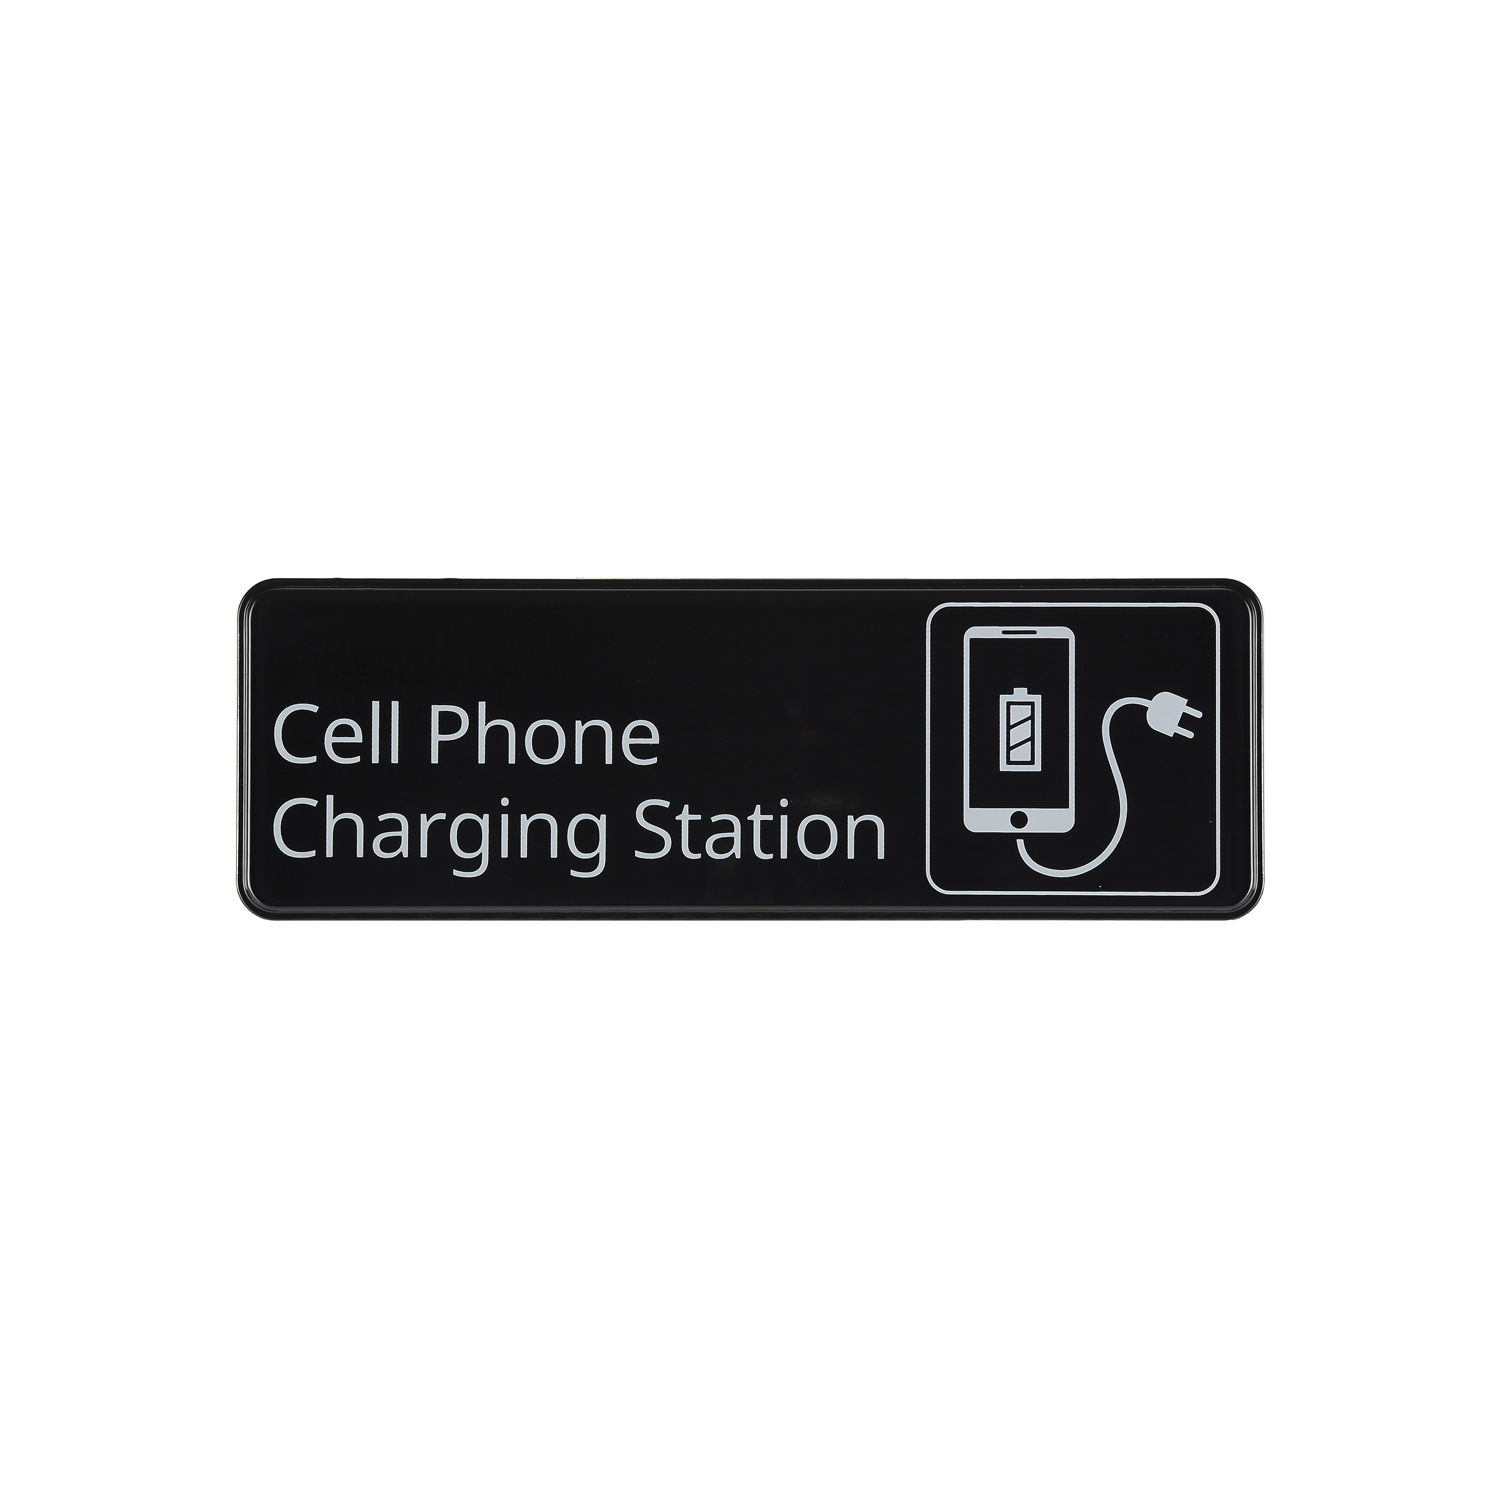 CAC China SCE3-CG10 Compliance Sign English "Cell Phone Charging Station" 9" x 3" H